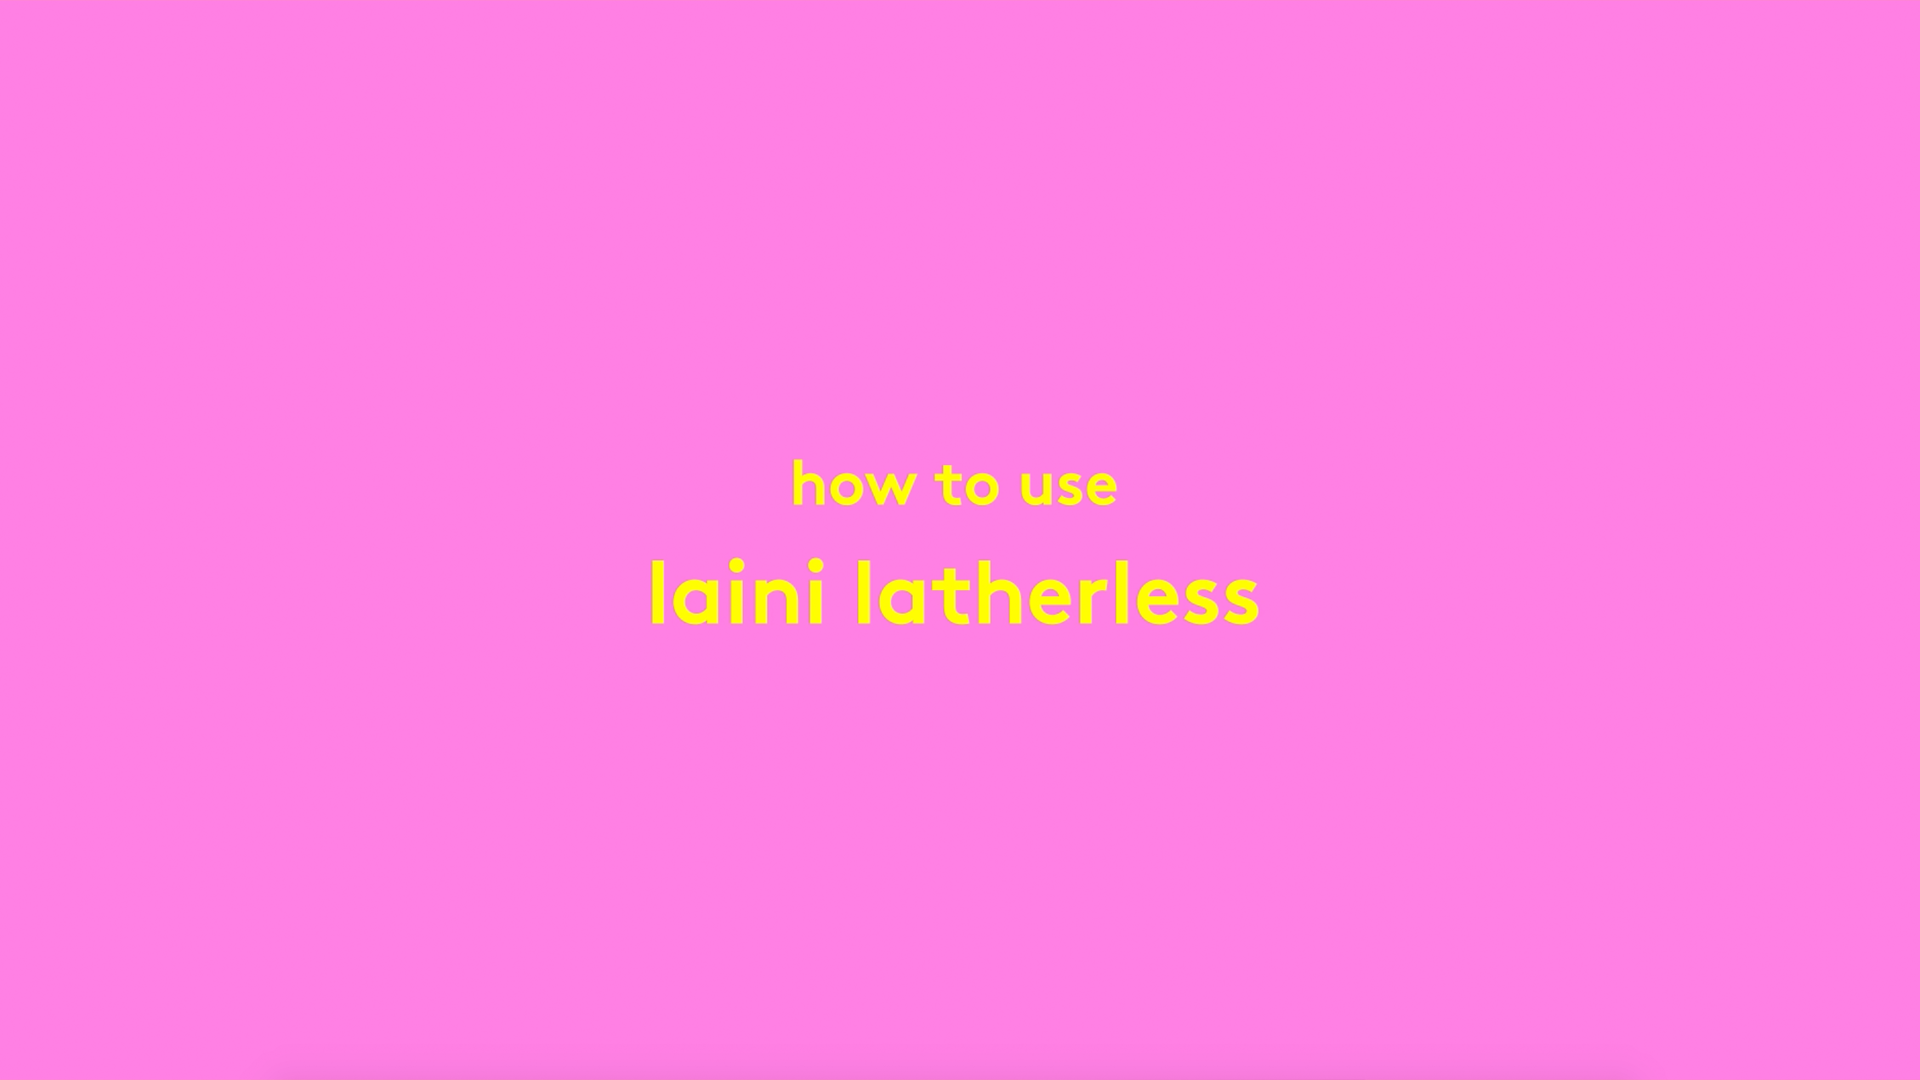 Video on how to use Laini Latherless